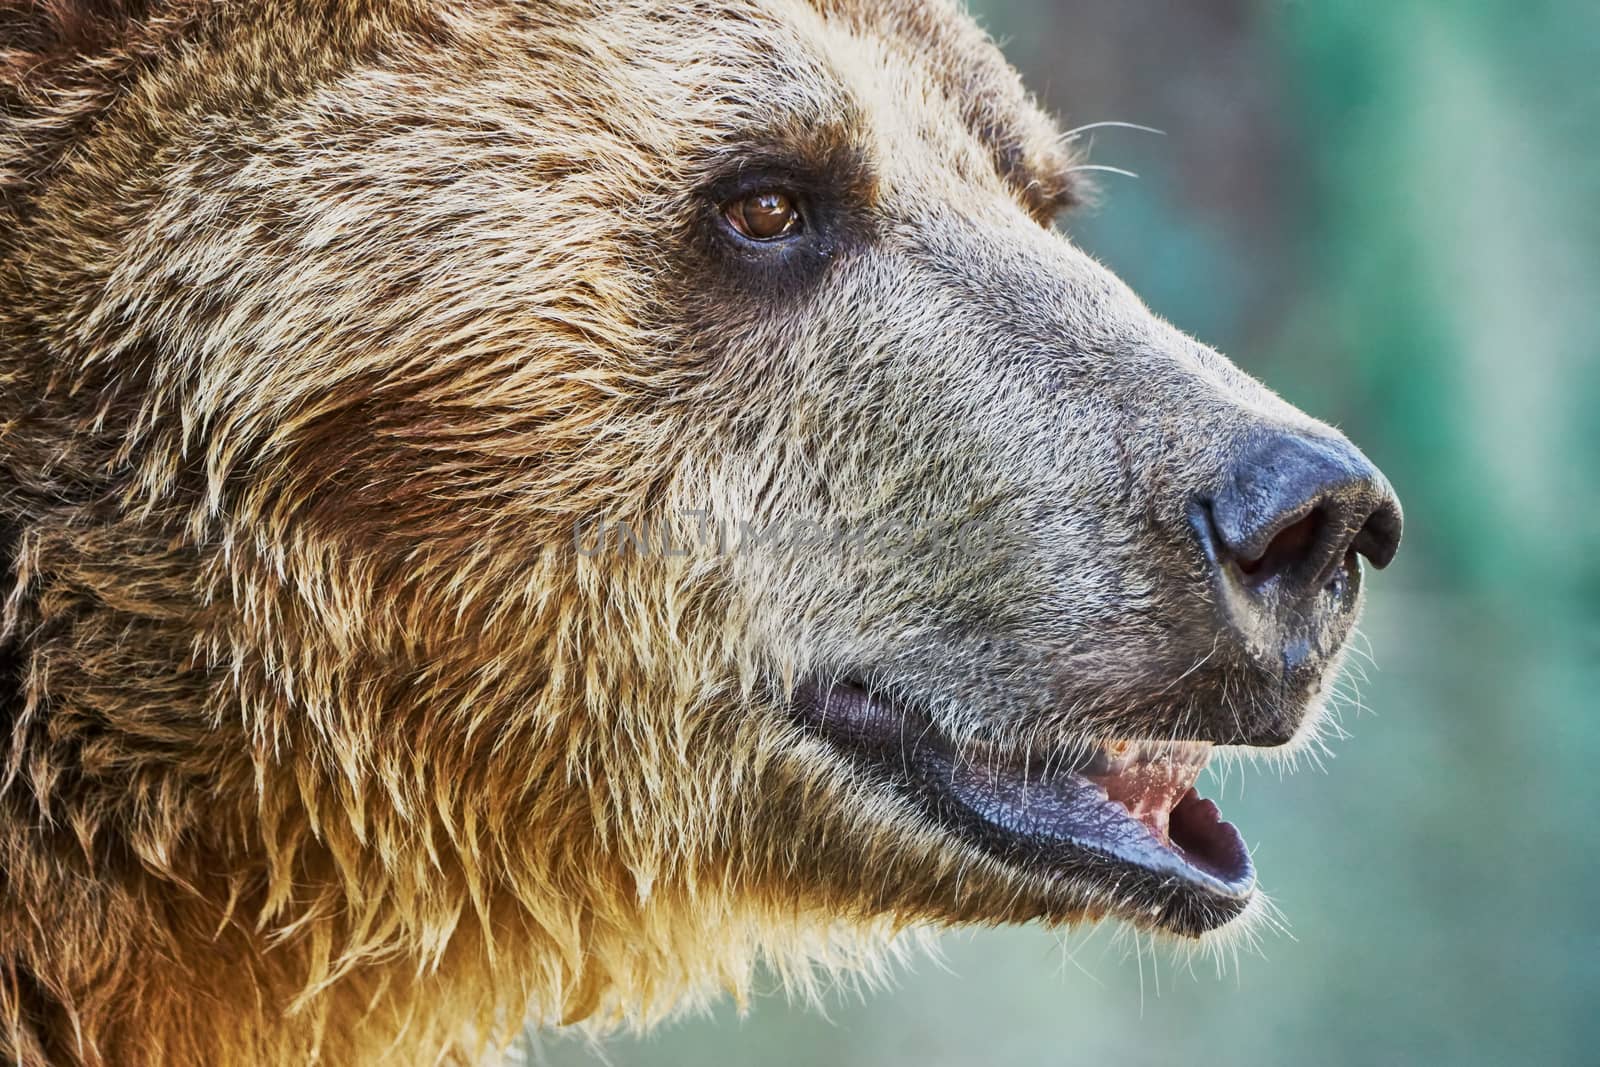 Brown bear in a zoo  by Vitolef